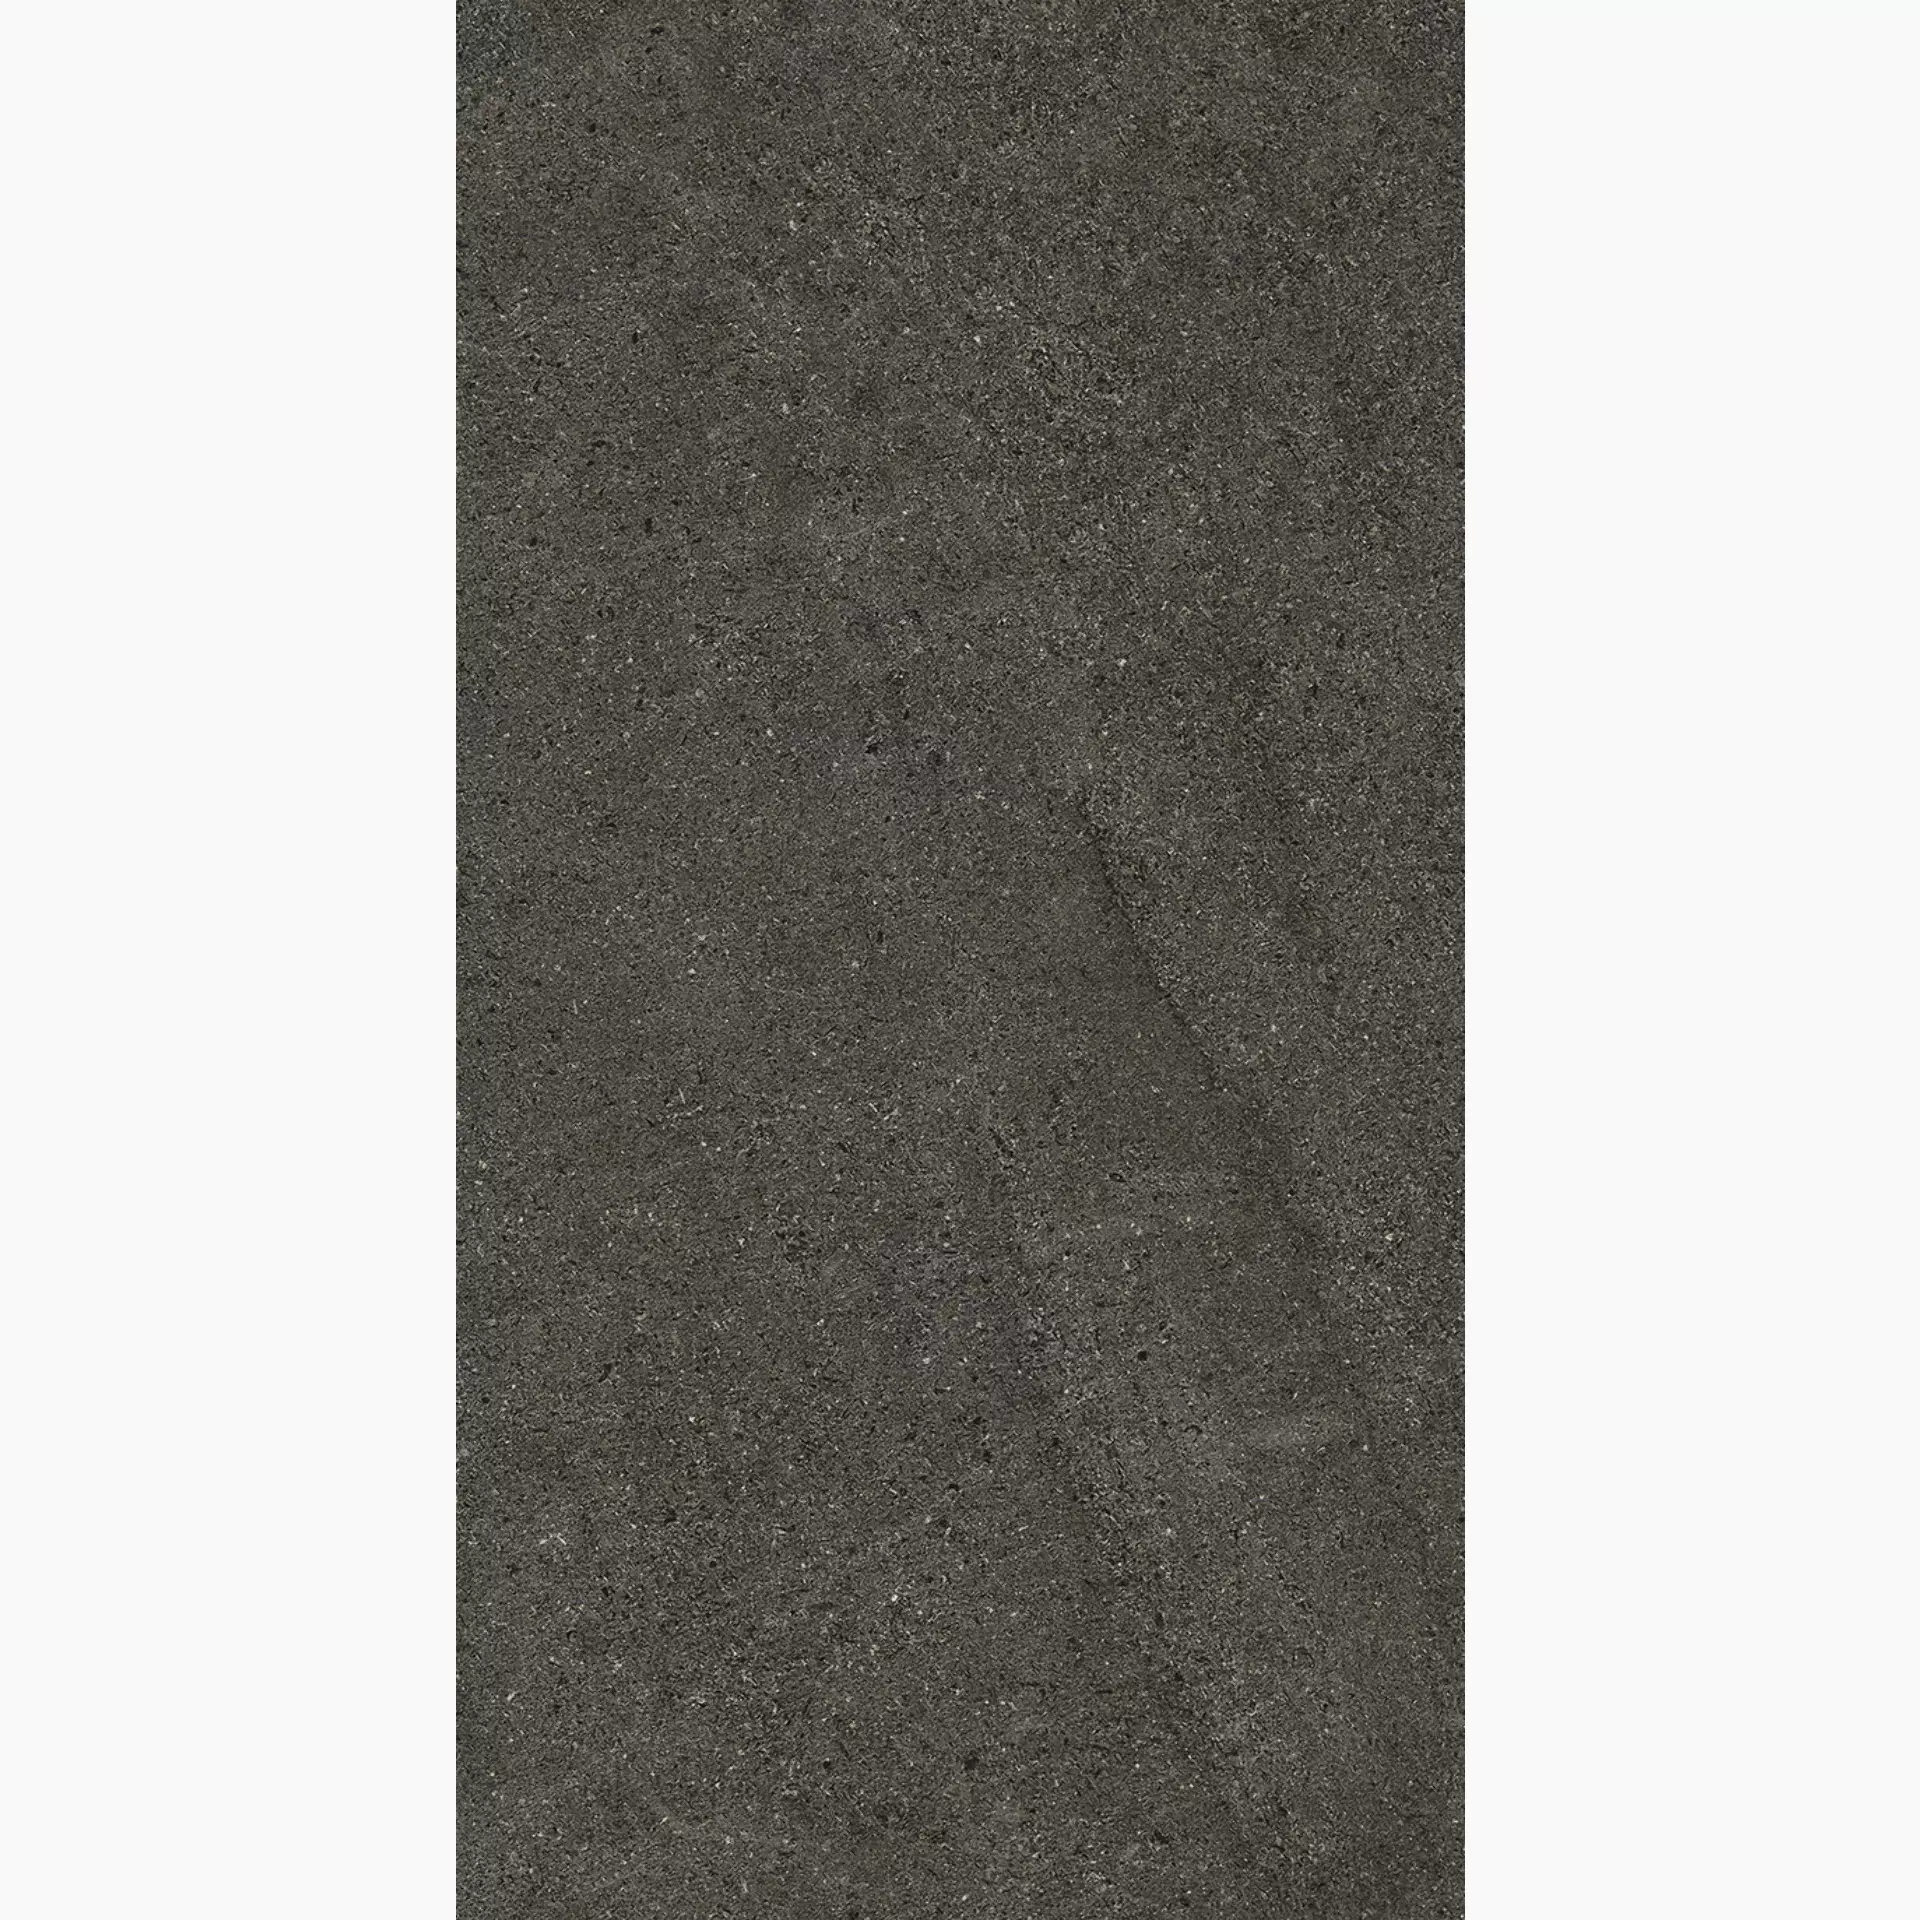 Margres Hybrid Black Touch B2562HB5T 60x120cm rectified 11mm